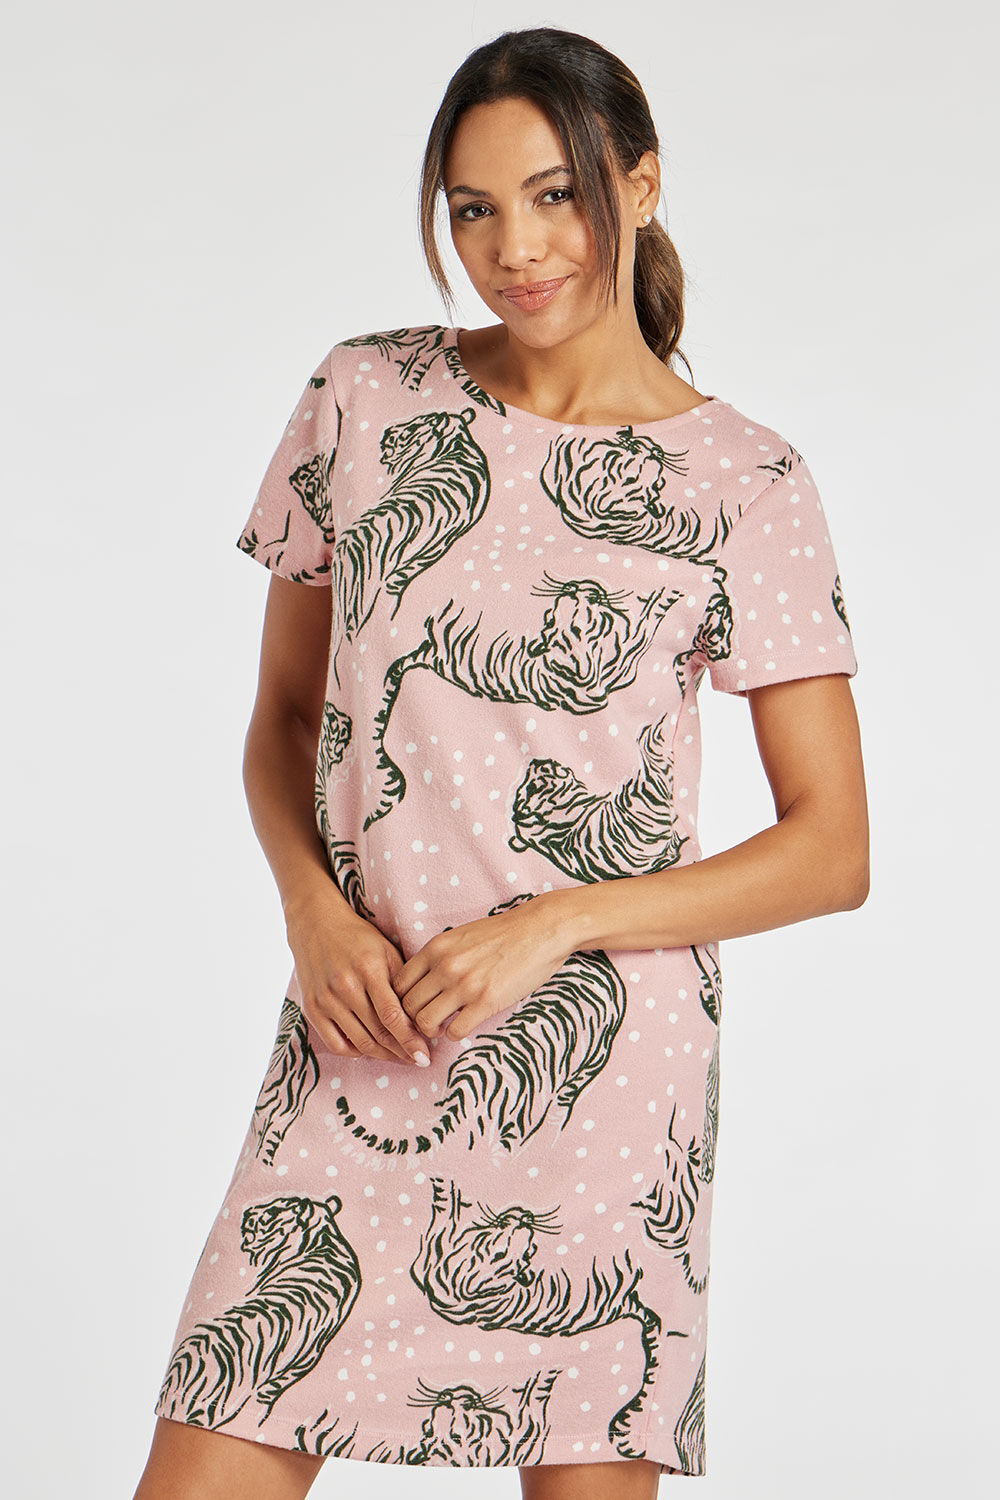 Bonmarche Pink Tiger and Spot Print Soft Touch Nightdress, Size: 08-10